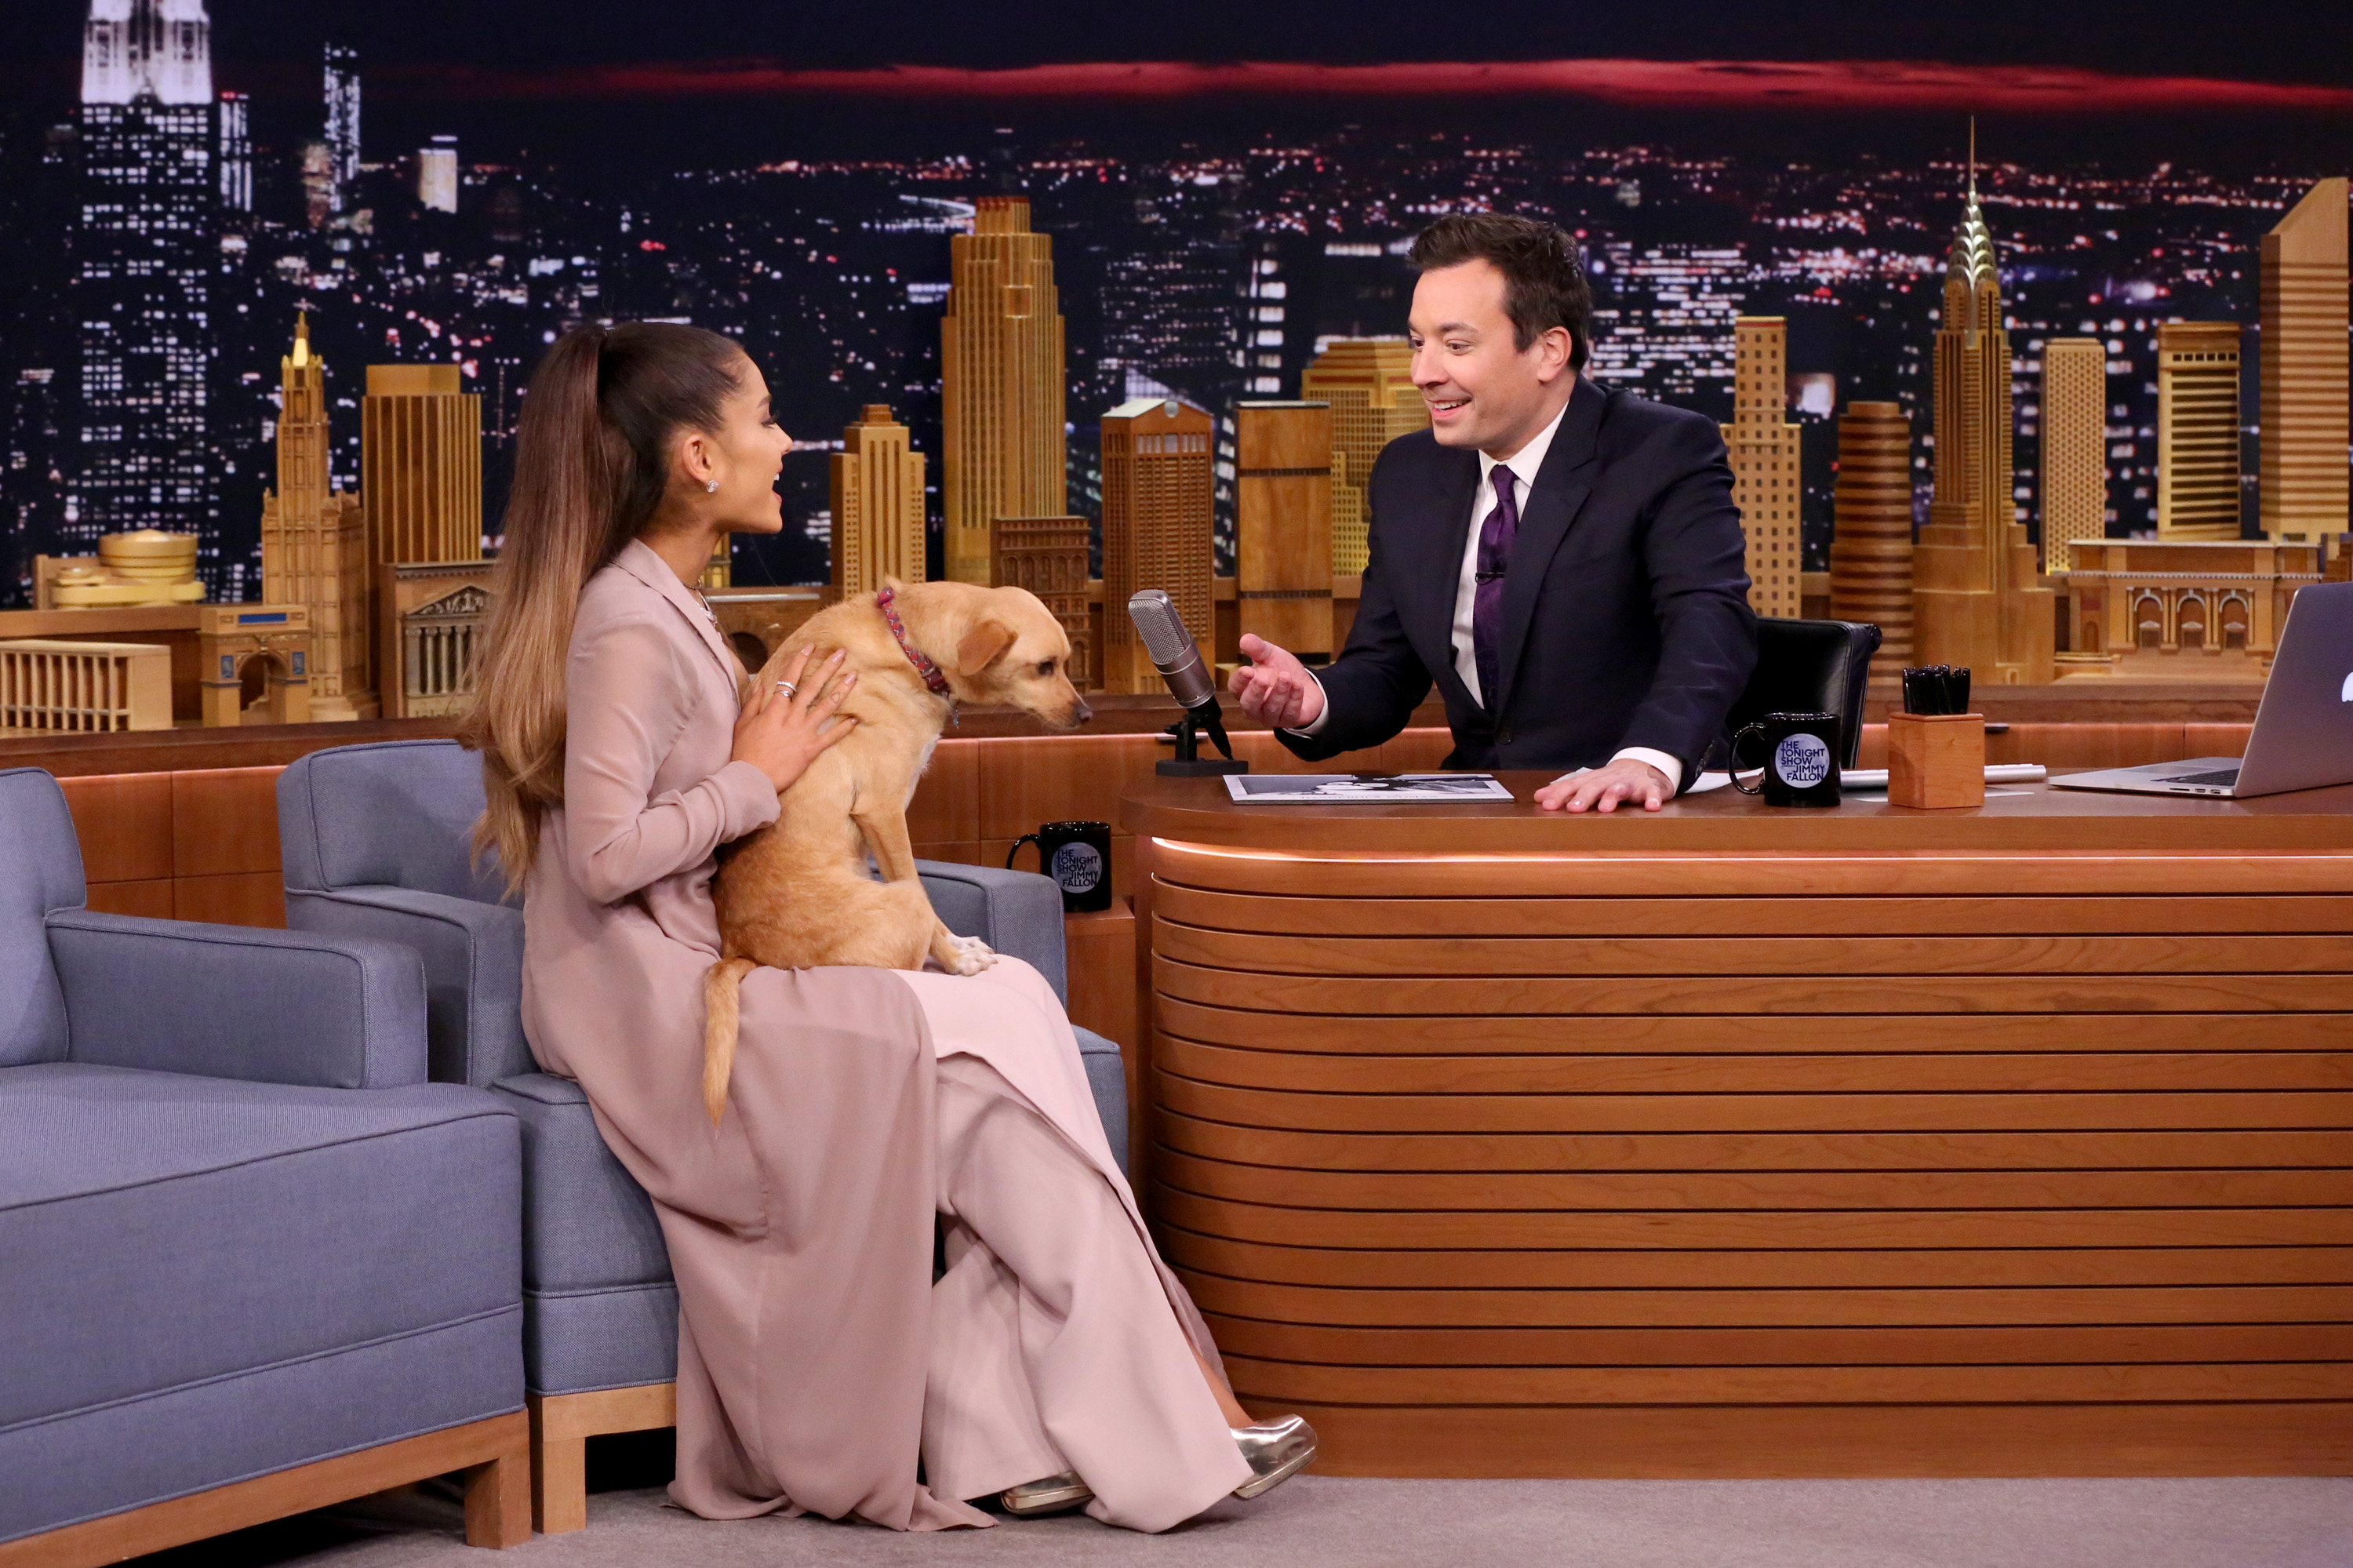 Singer Ariana Grande during an interview with host Jimmy Fallon